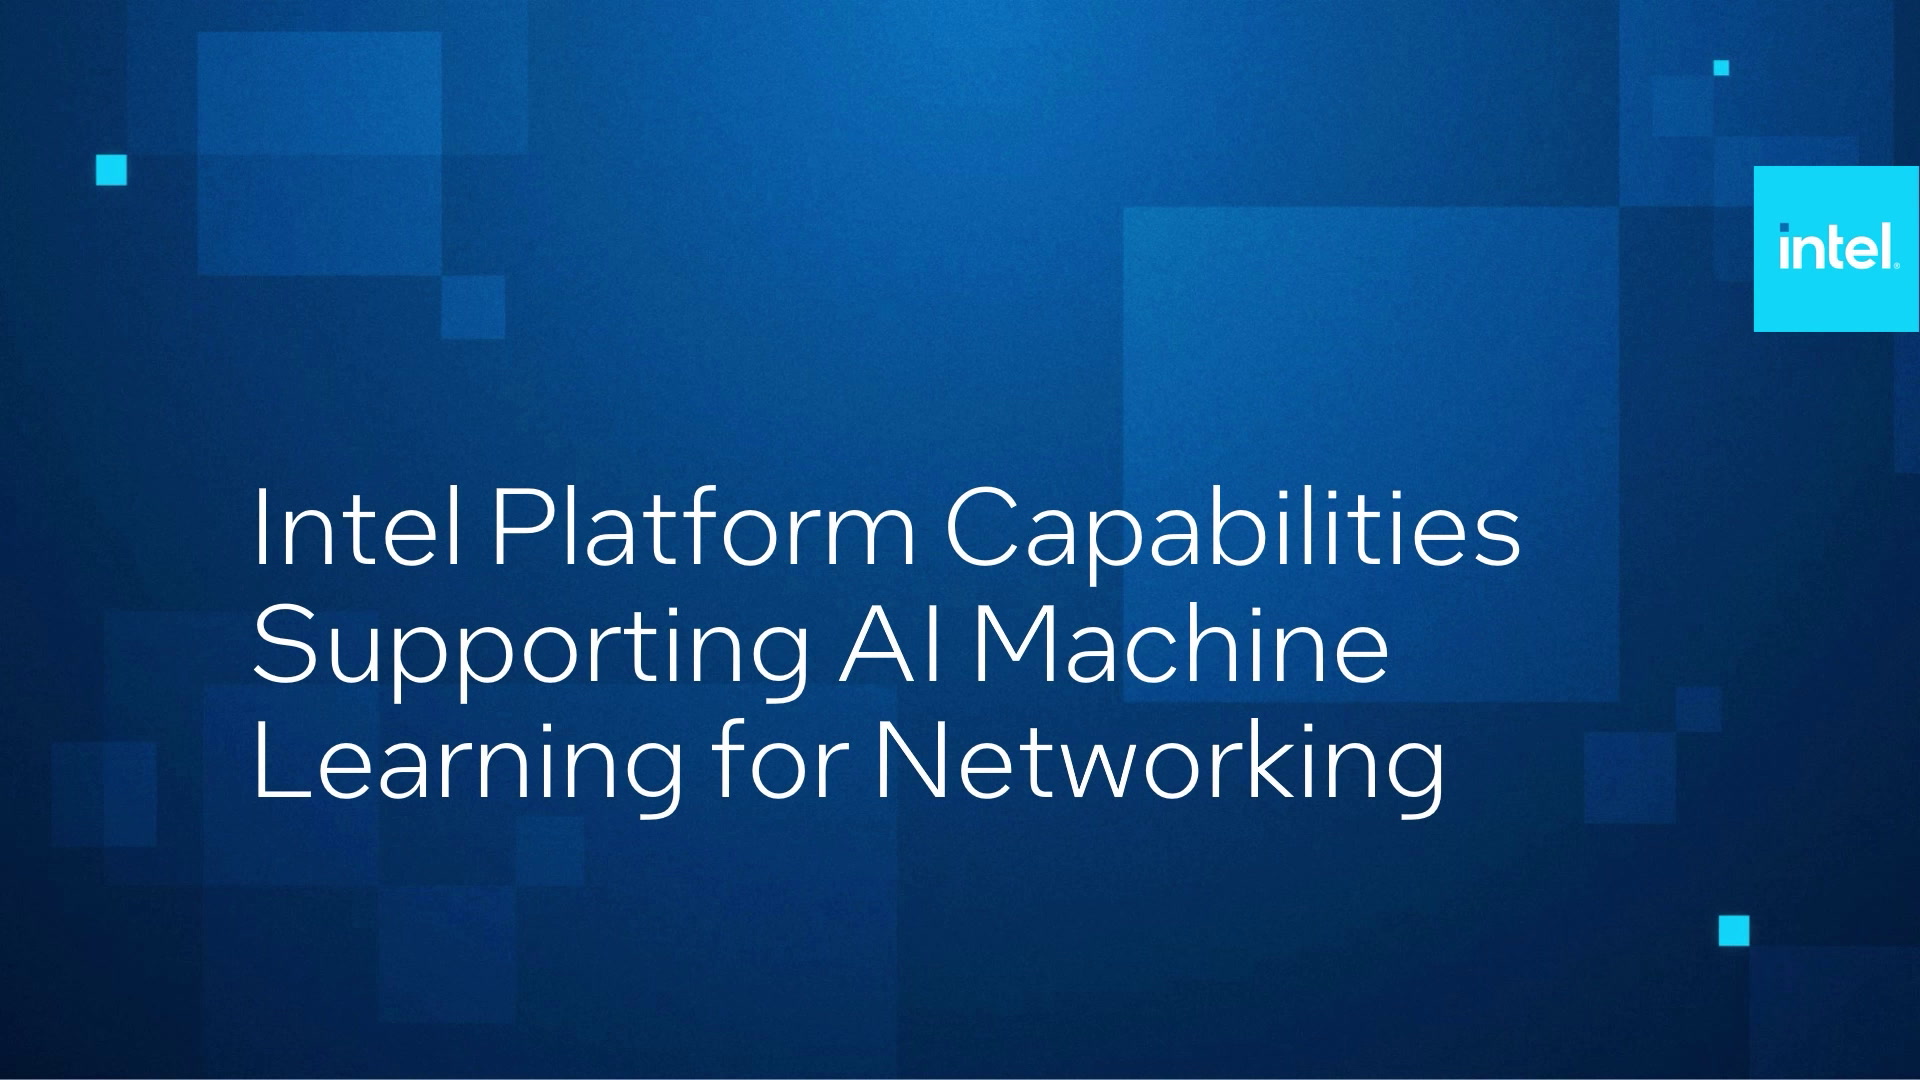 Intel Platform Capabilities Supporting AI Machine Learning for Networking